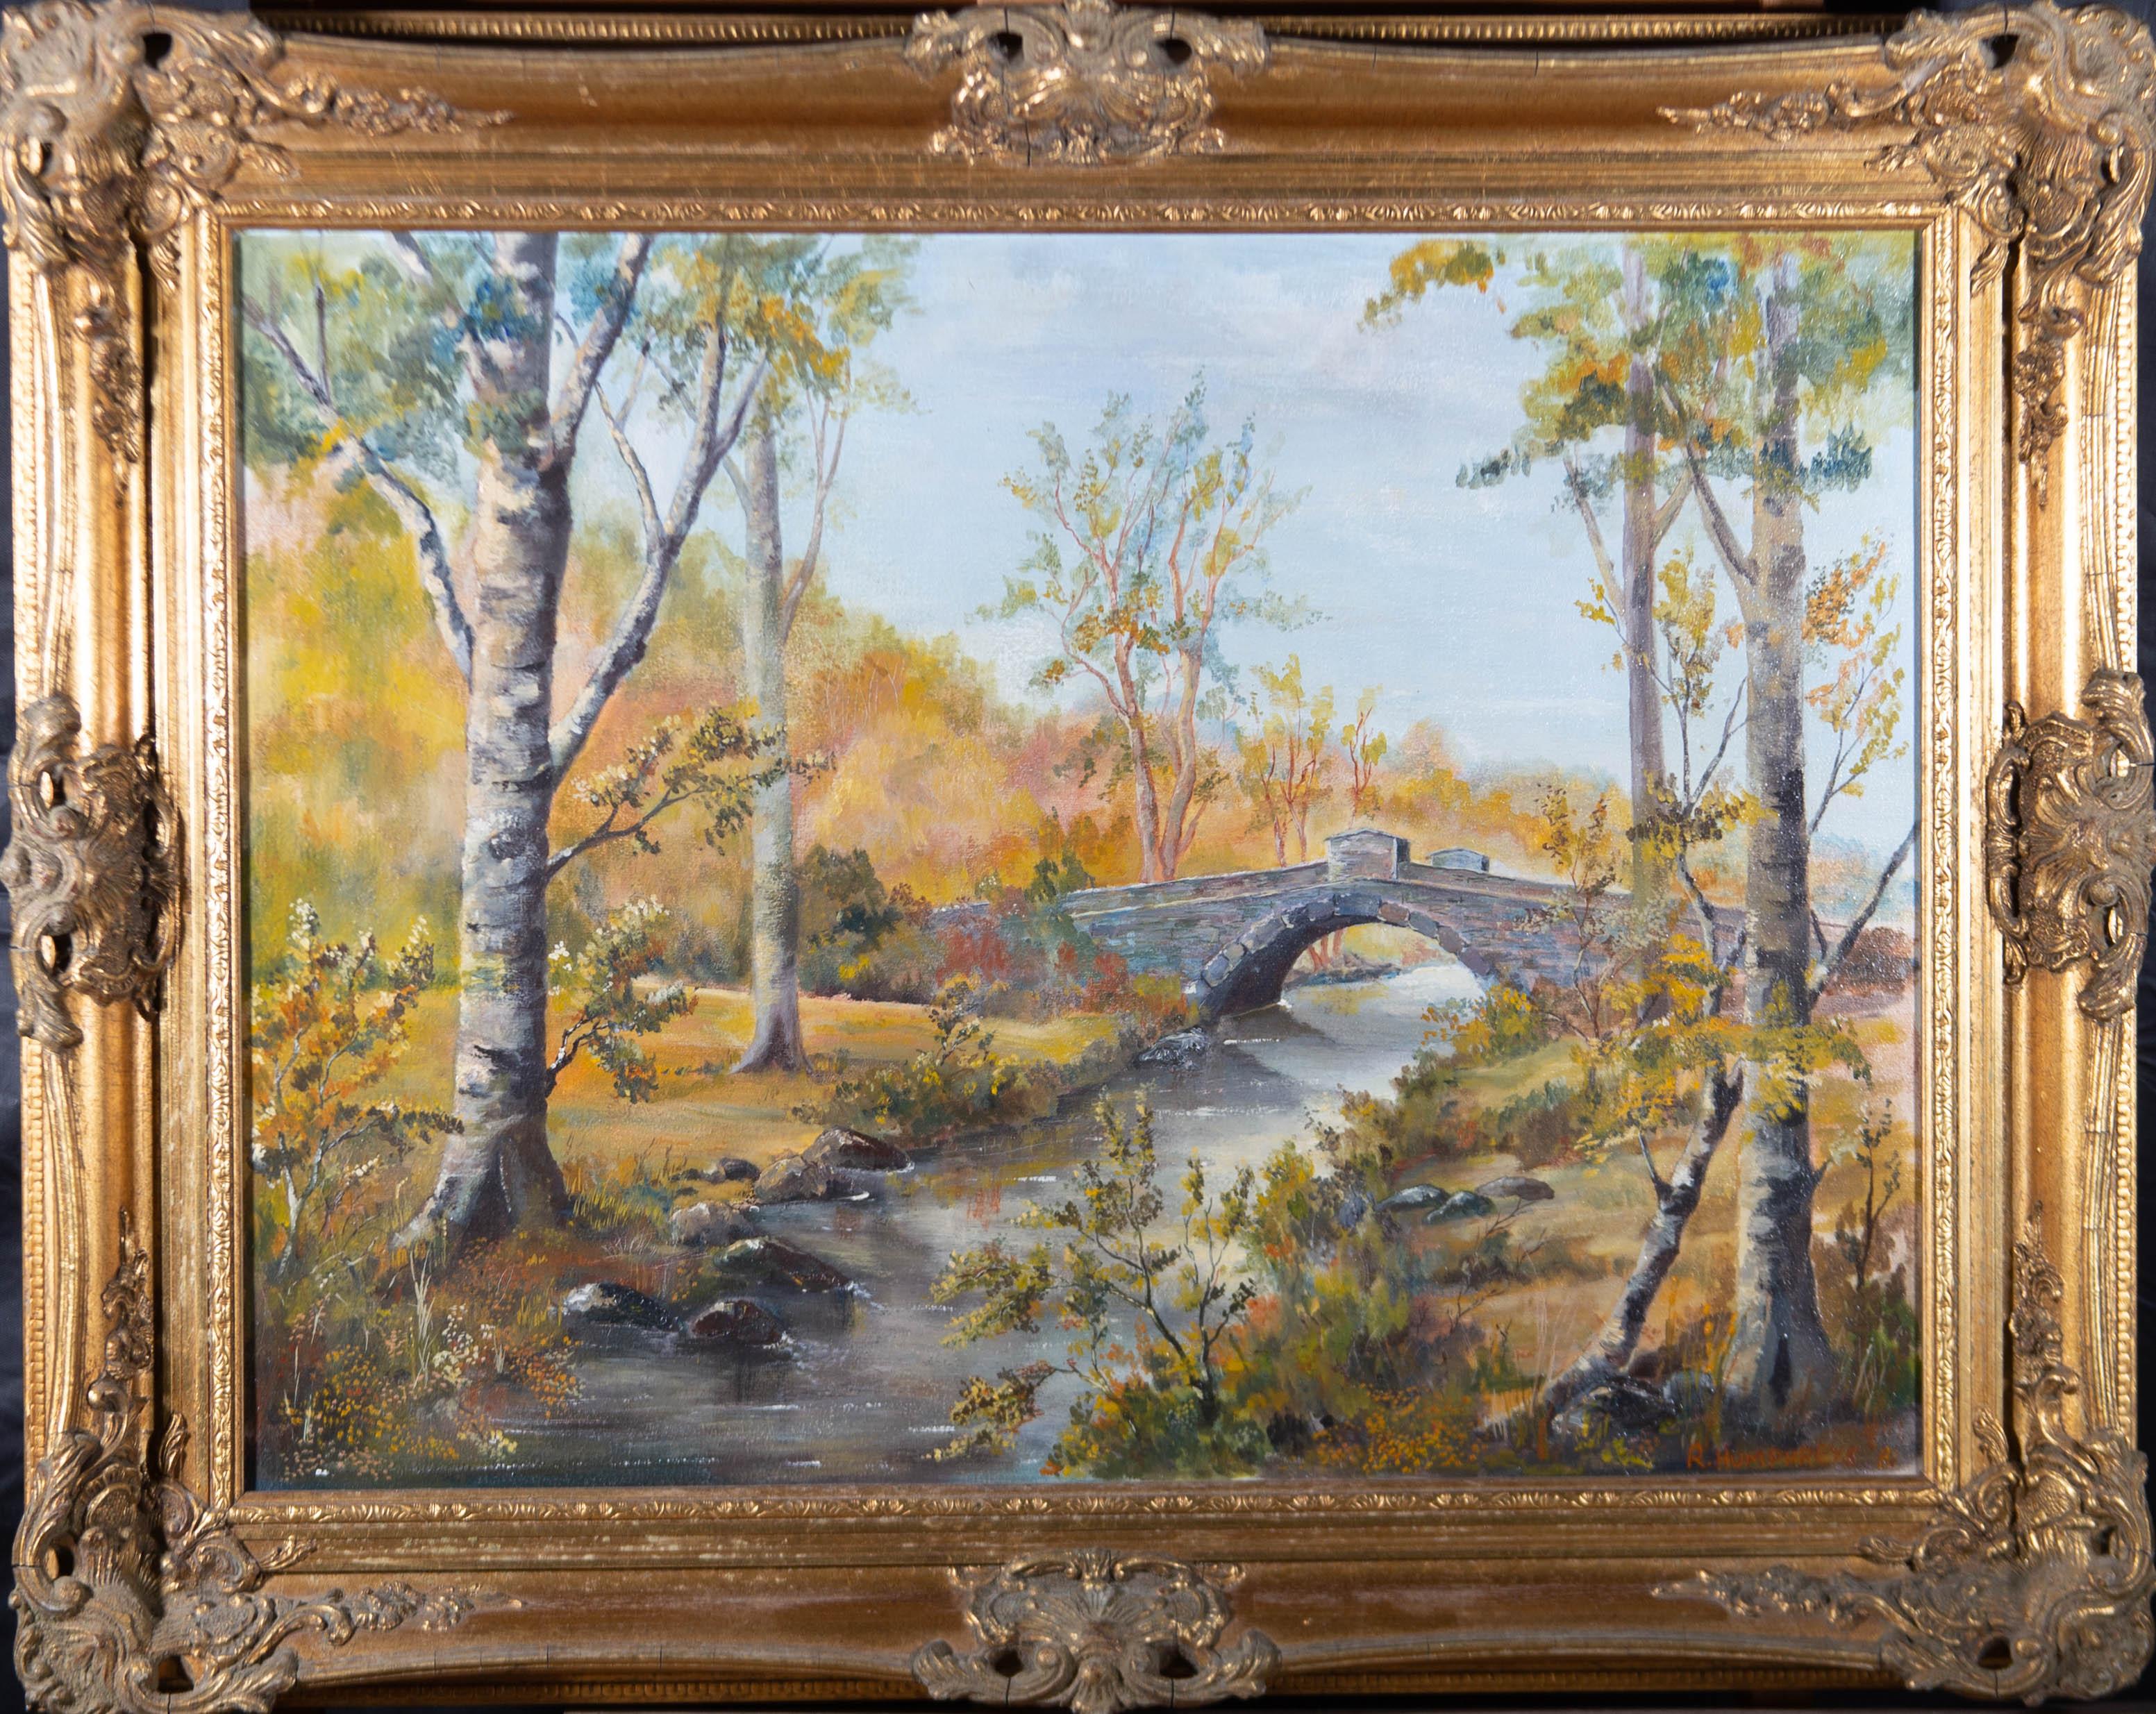 A landscape featuring a stone bridge crossing a river, surrounded by autumnal trees. Presented in an ornate pierced gilt-effect frame. Signed and dated to the lower-right edge. On canvas on stretchers.
